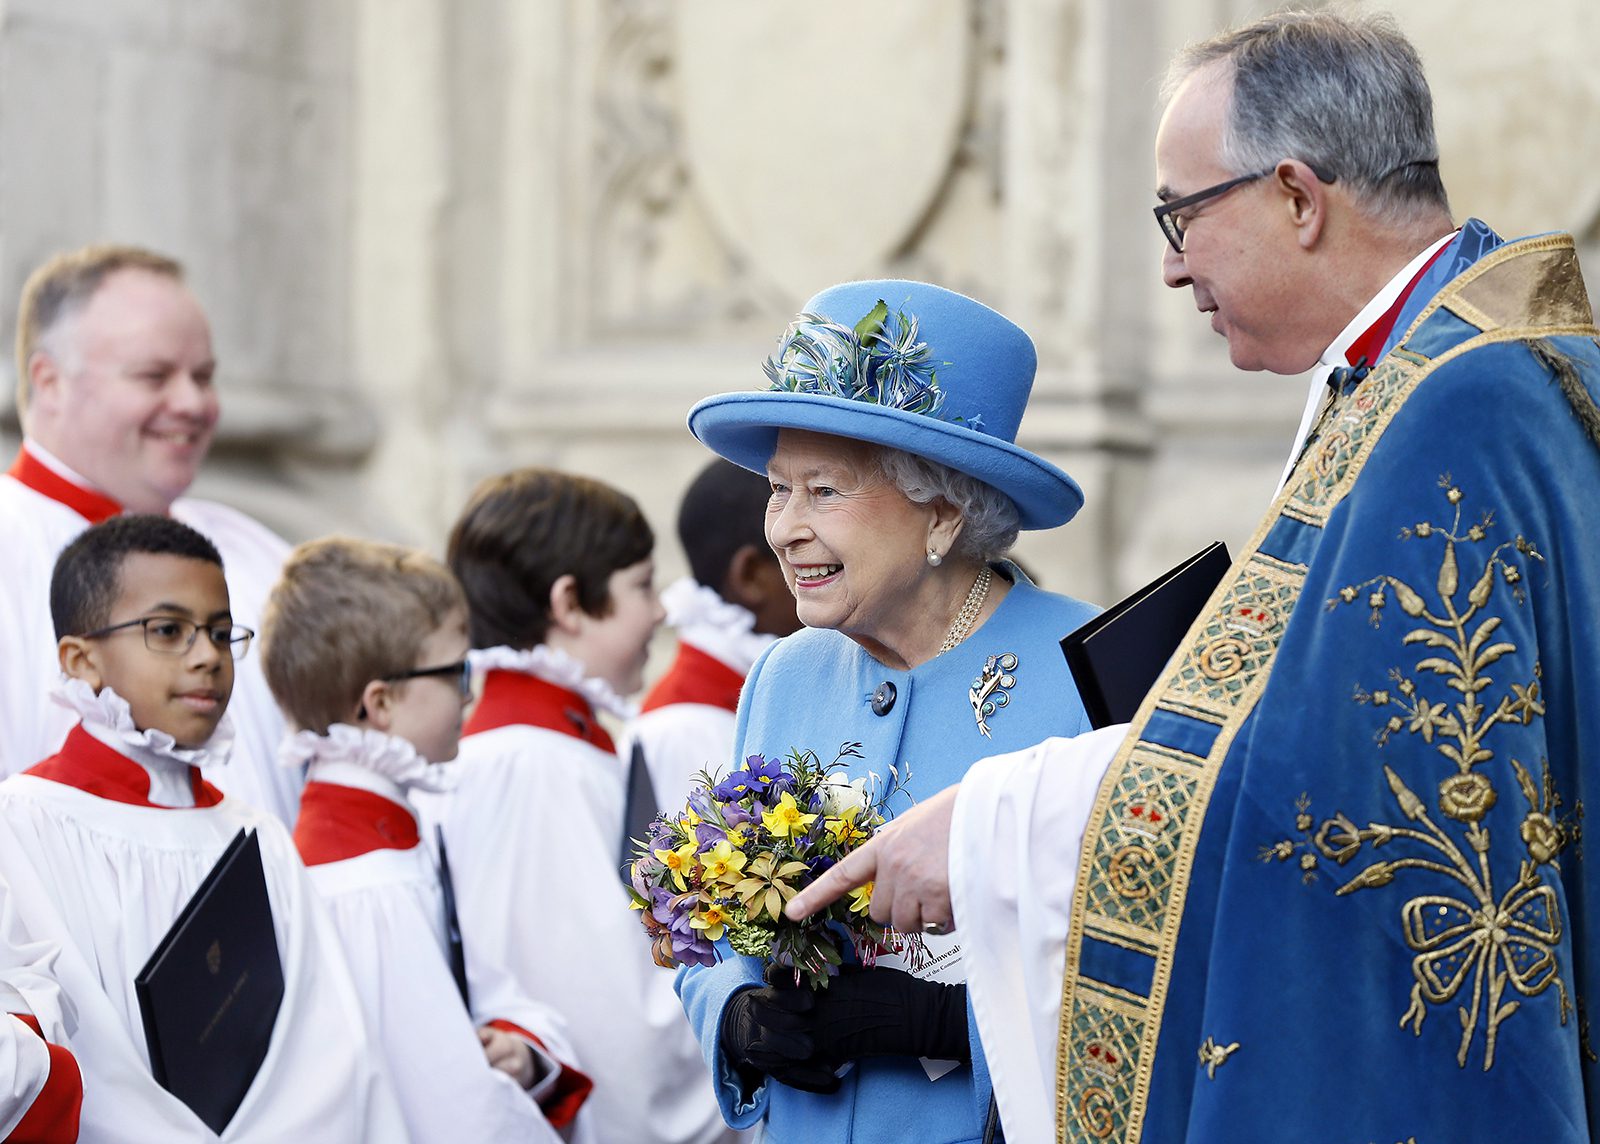 Britain's Queen Elizabeth II passes the choir as she leaves after attending the Commonwealth Day service at Westminster Abbey in London, Monday, March 14, 2016. Organised by the Royal Commonwealth Society, the service is the largest annual inter-faith gathering in the United Kingdom. (AP Photo/Kirsty Wigglesworth)